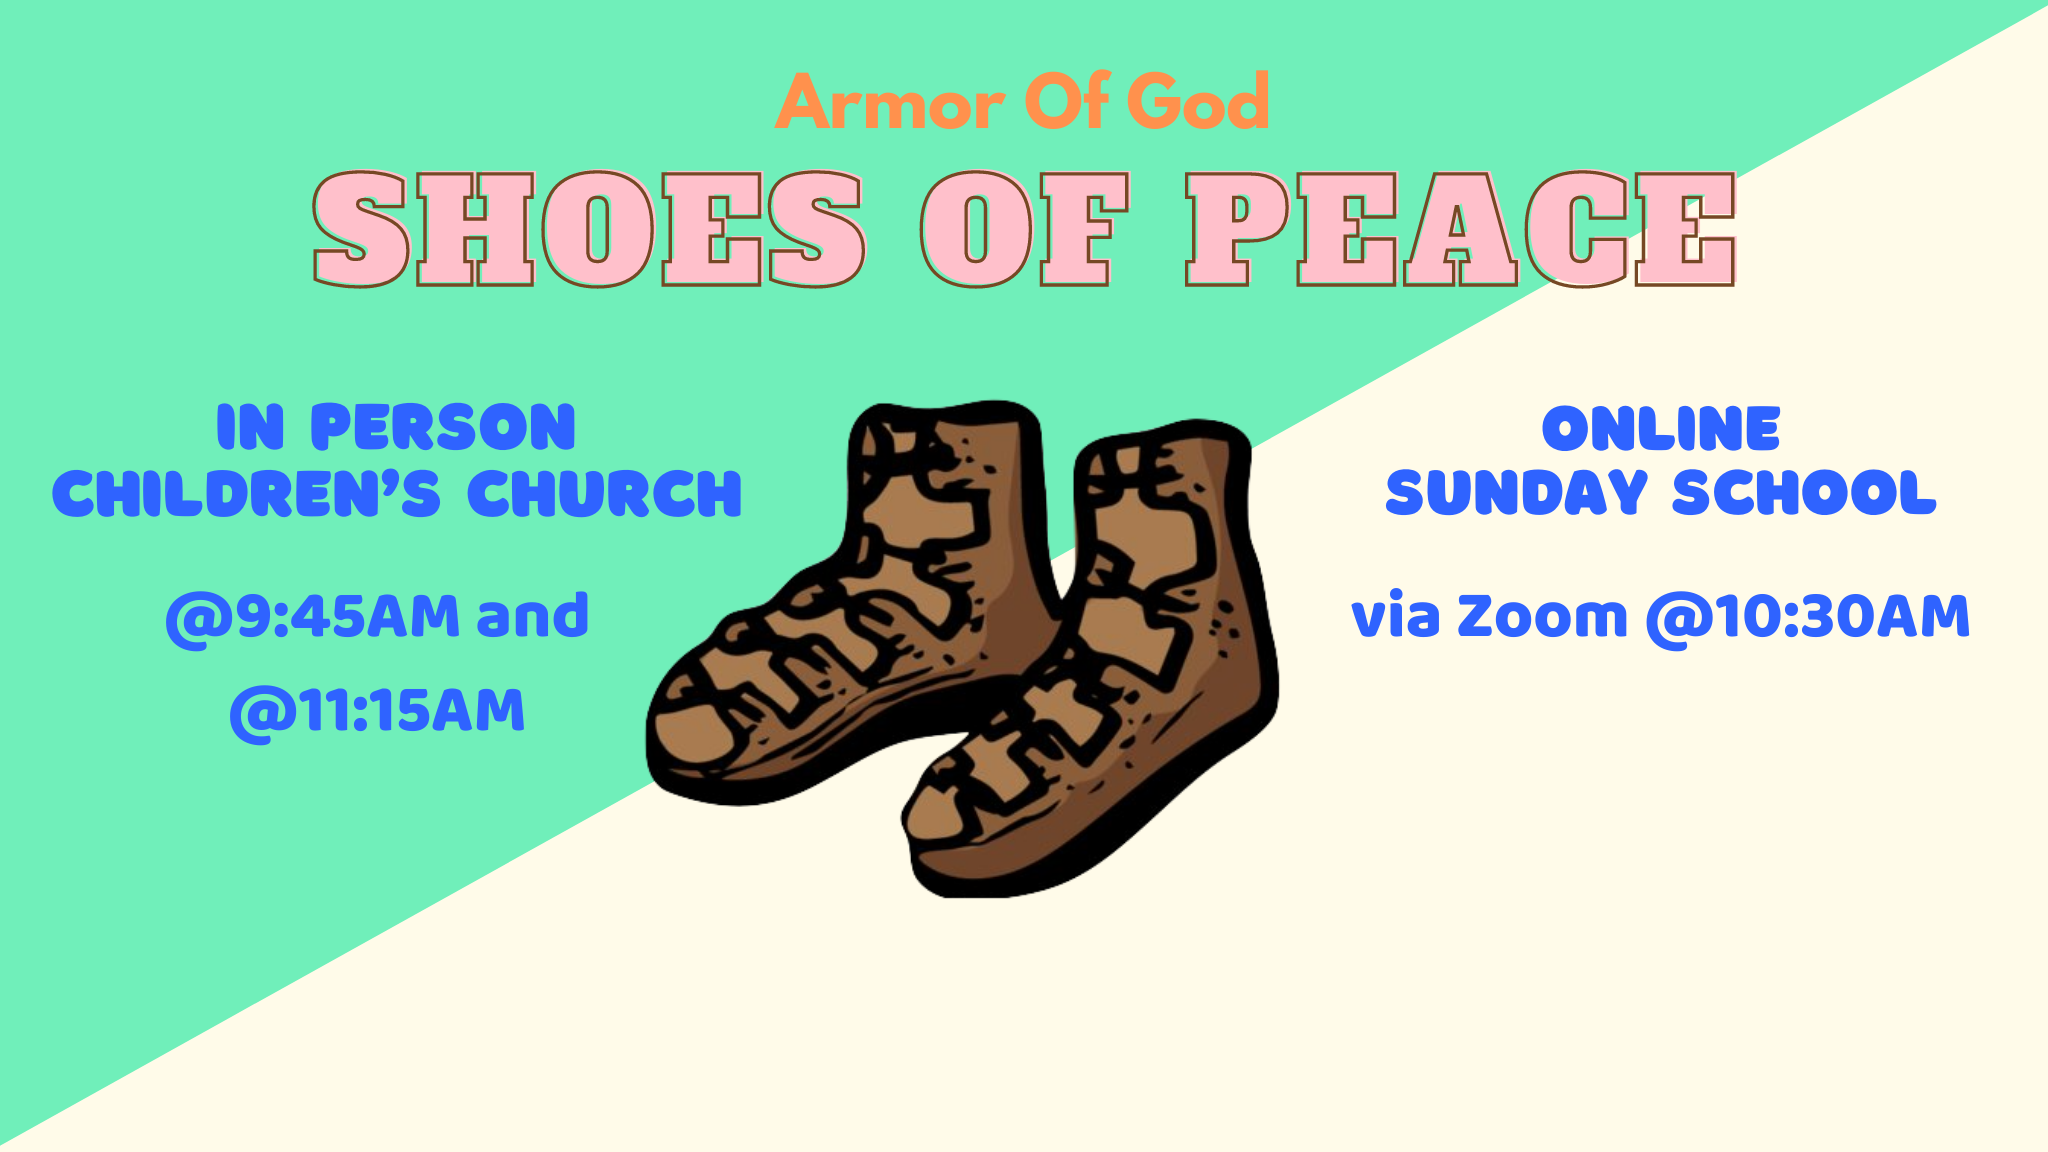 Armor of God - Shoes of Righteousness